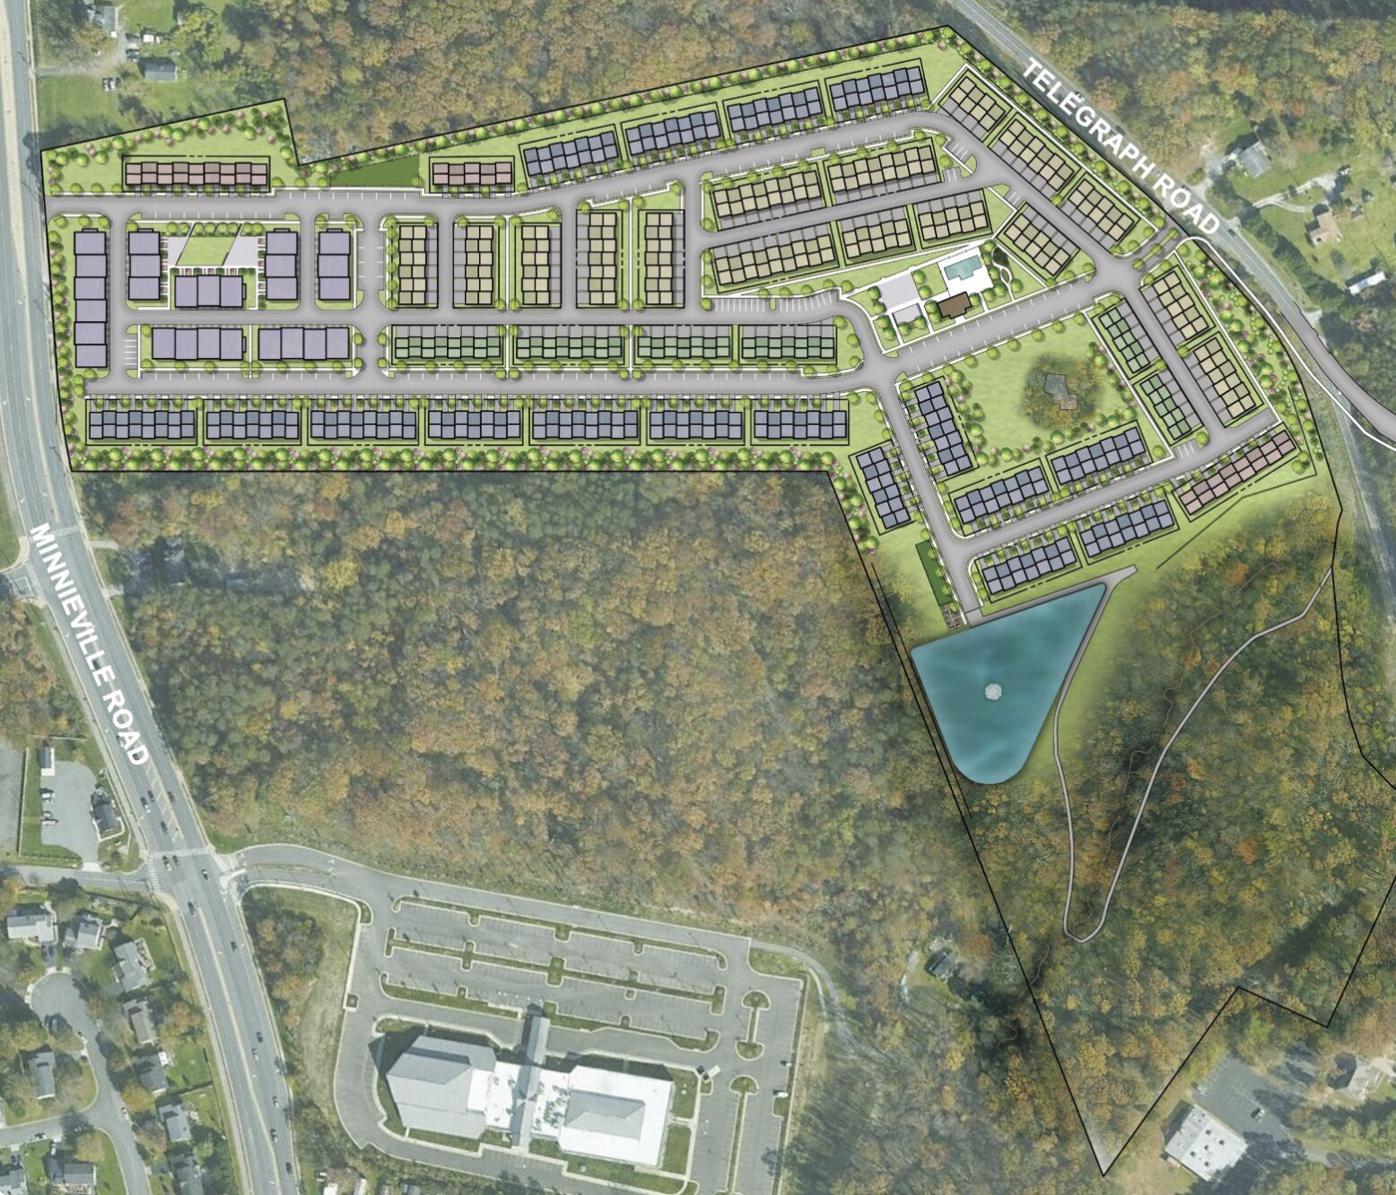 Woodbridge issues RFP to develop former Country Club property